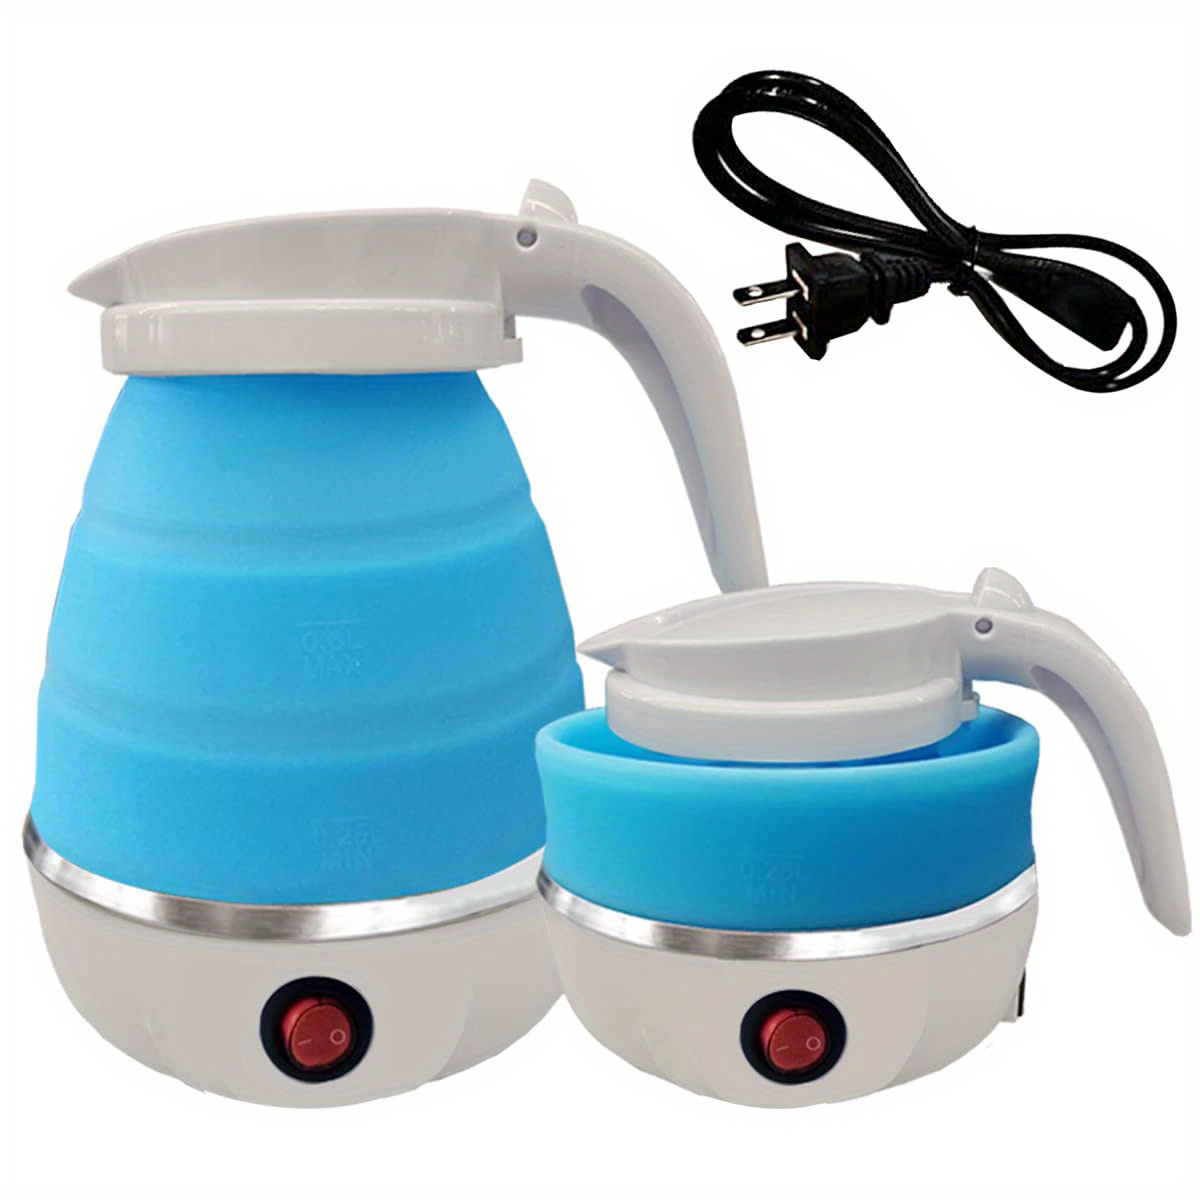 Portable Electric Travel Kettle With Adjustable Temperature